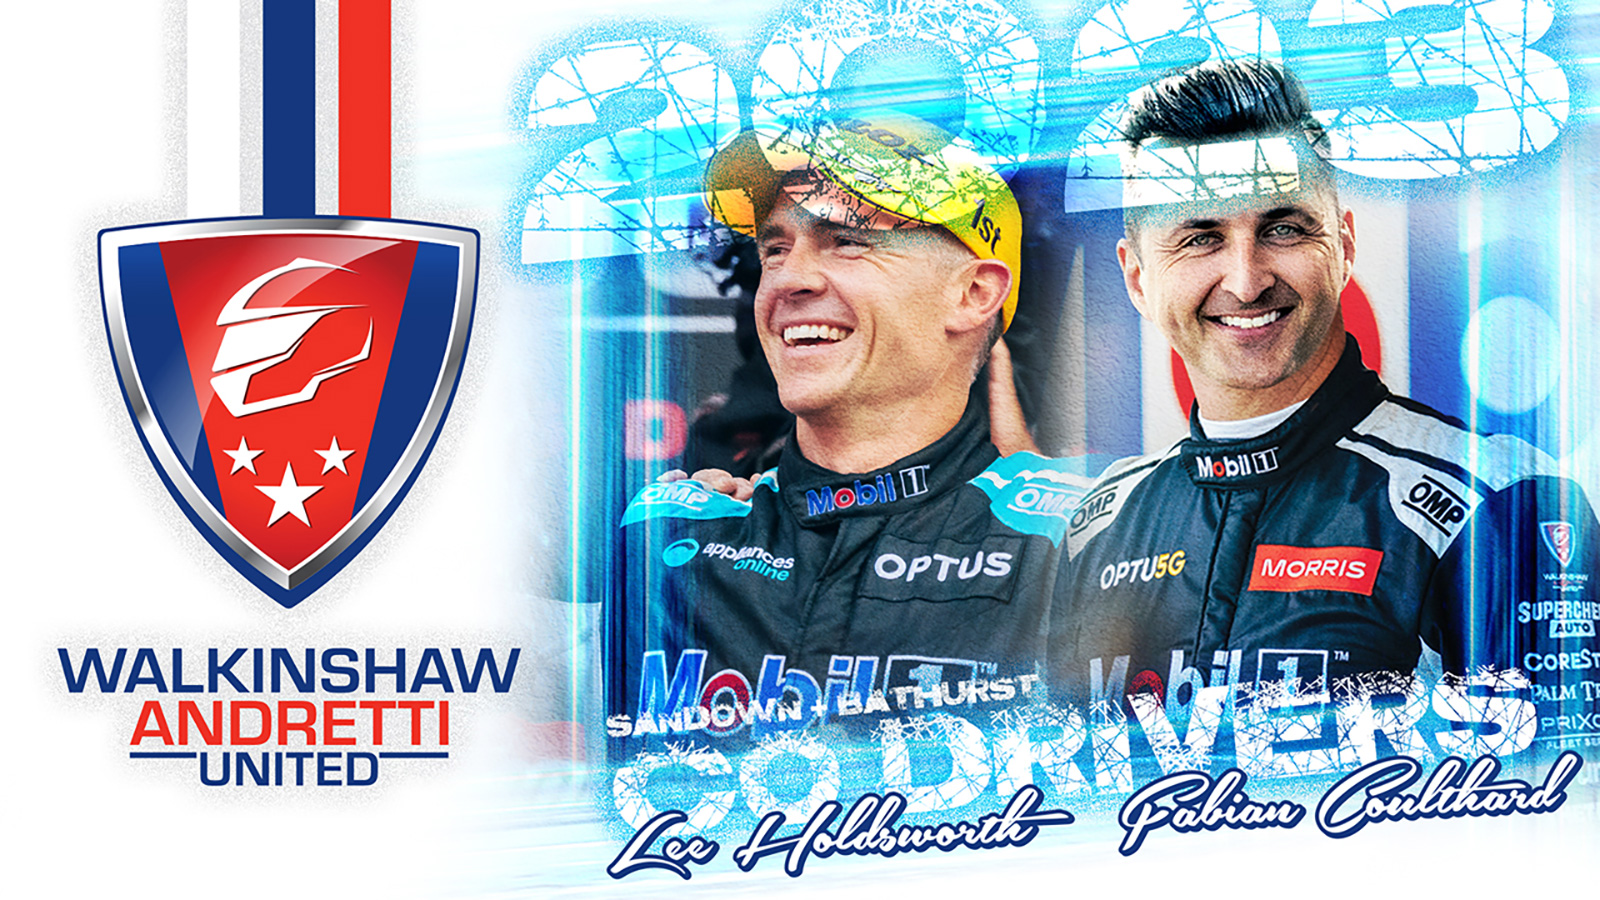 Holdsworth will partner Mostert and Coulthard will partner Percat in 2023.